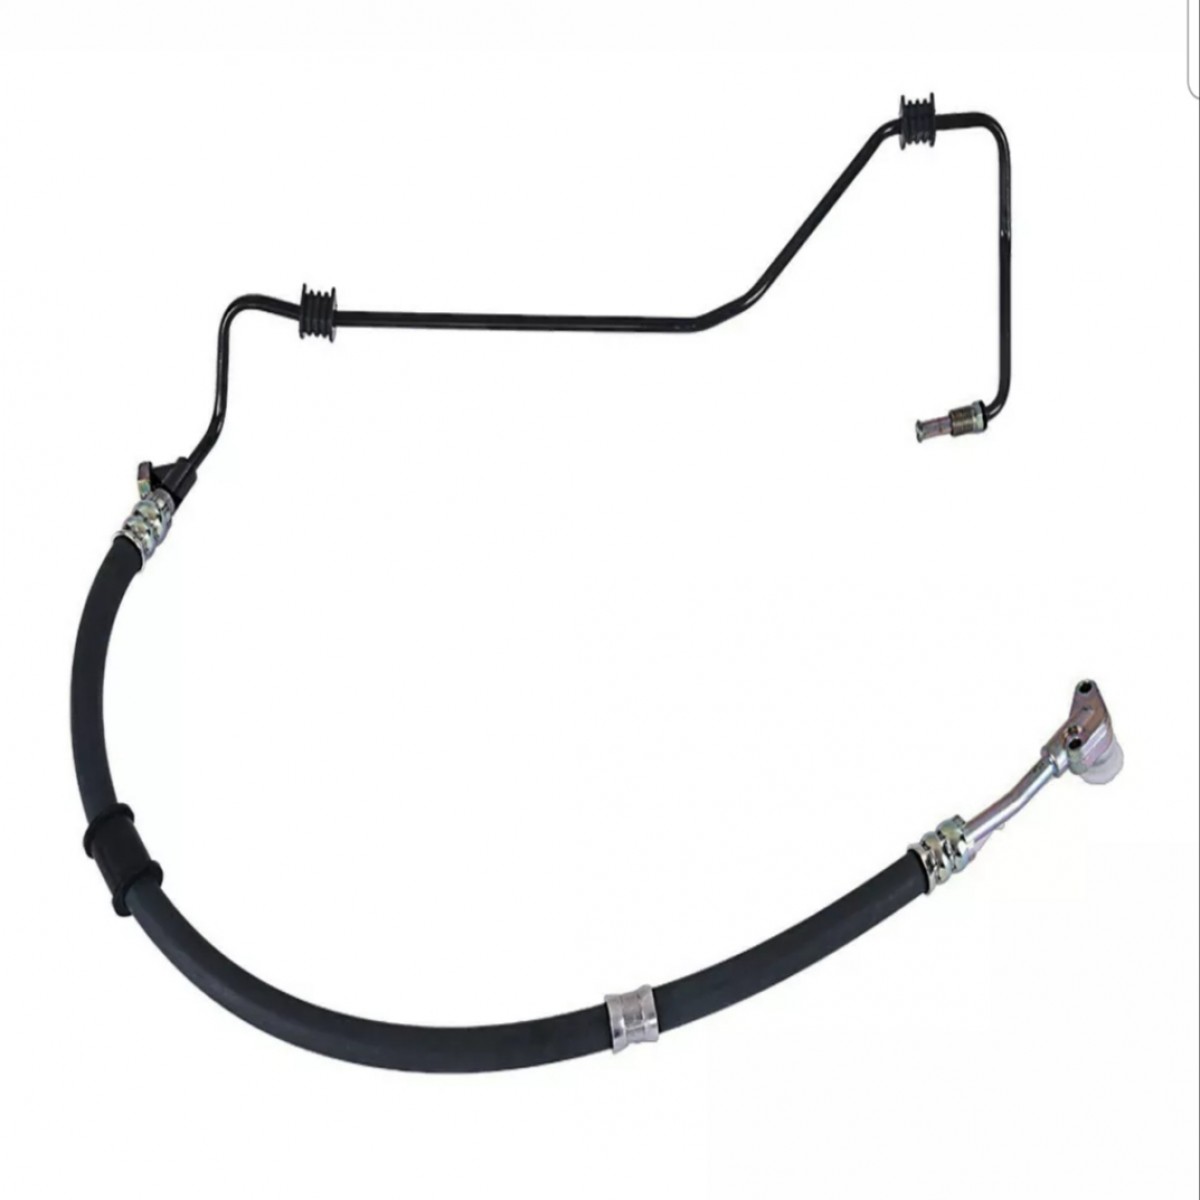 2003 To 2007 Honda Accord Power Steering Line for sale in Kingston